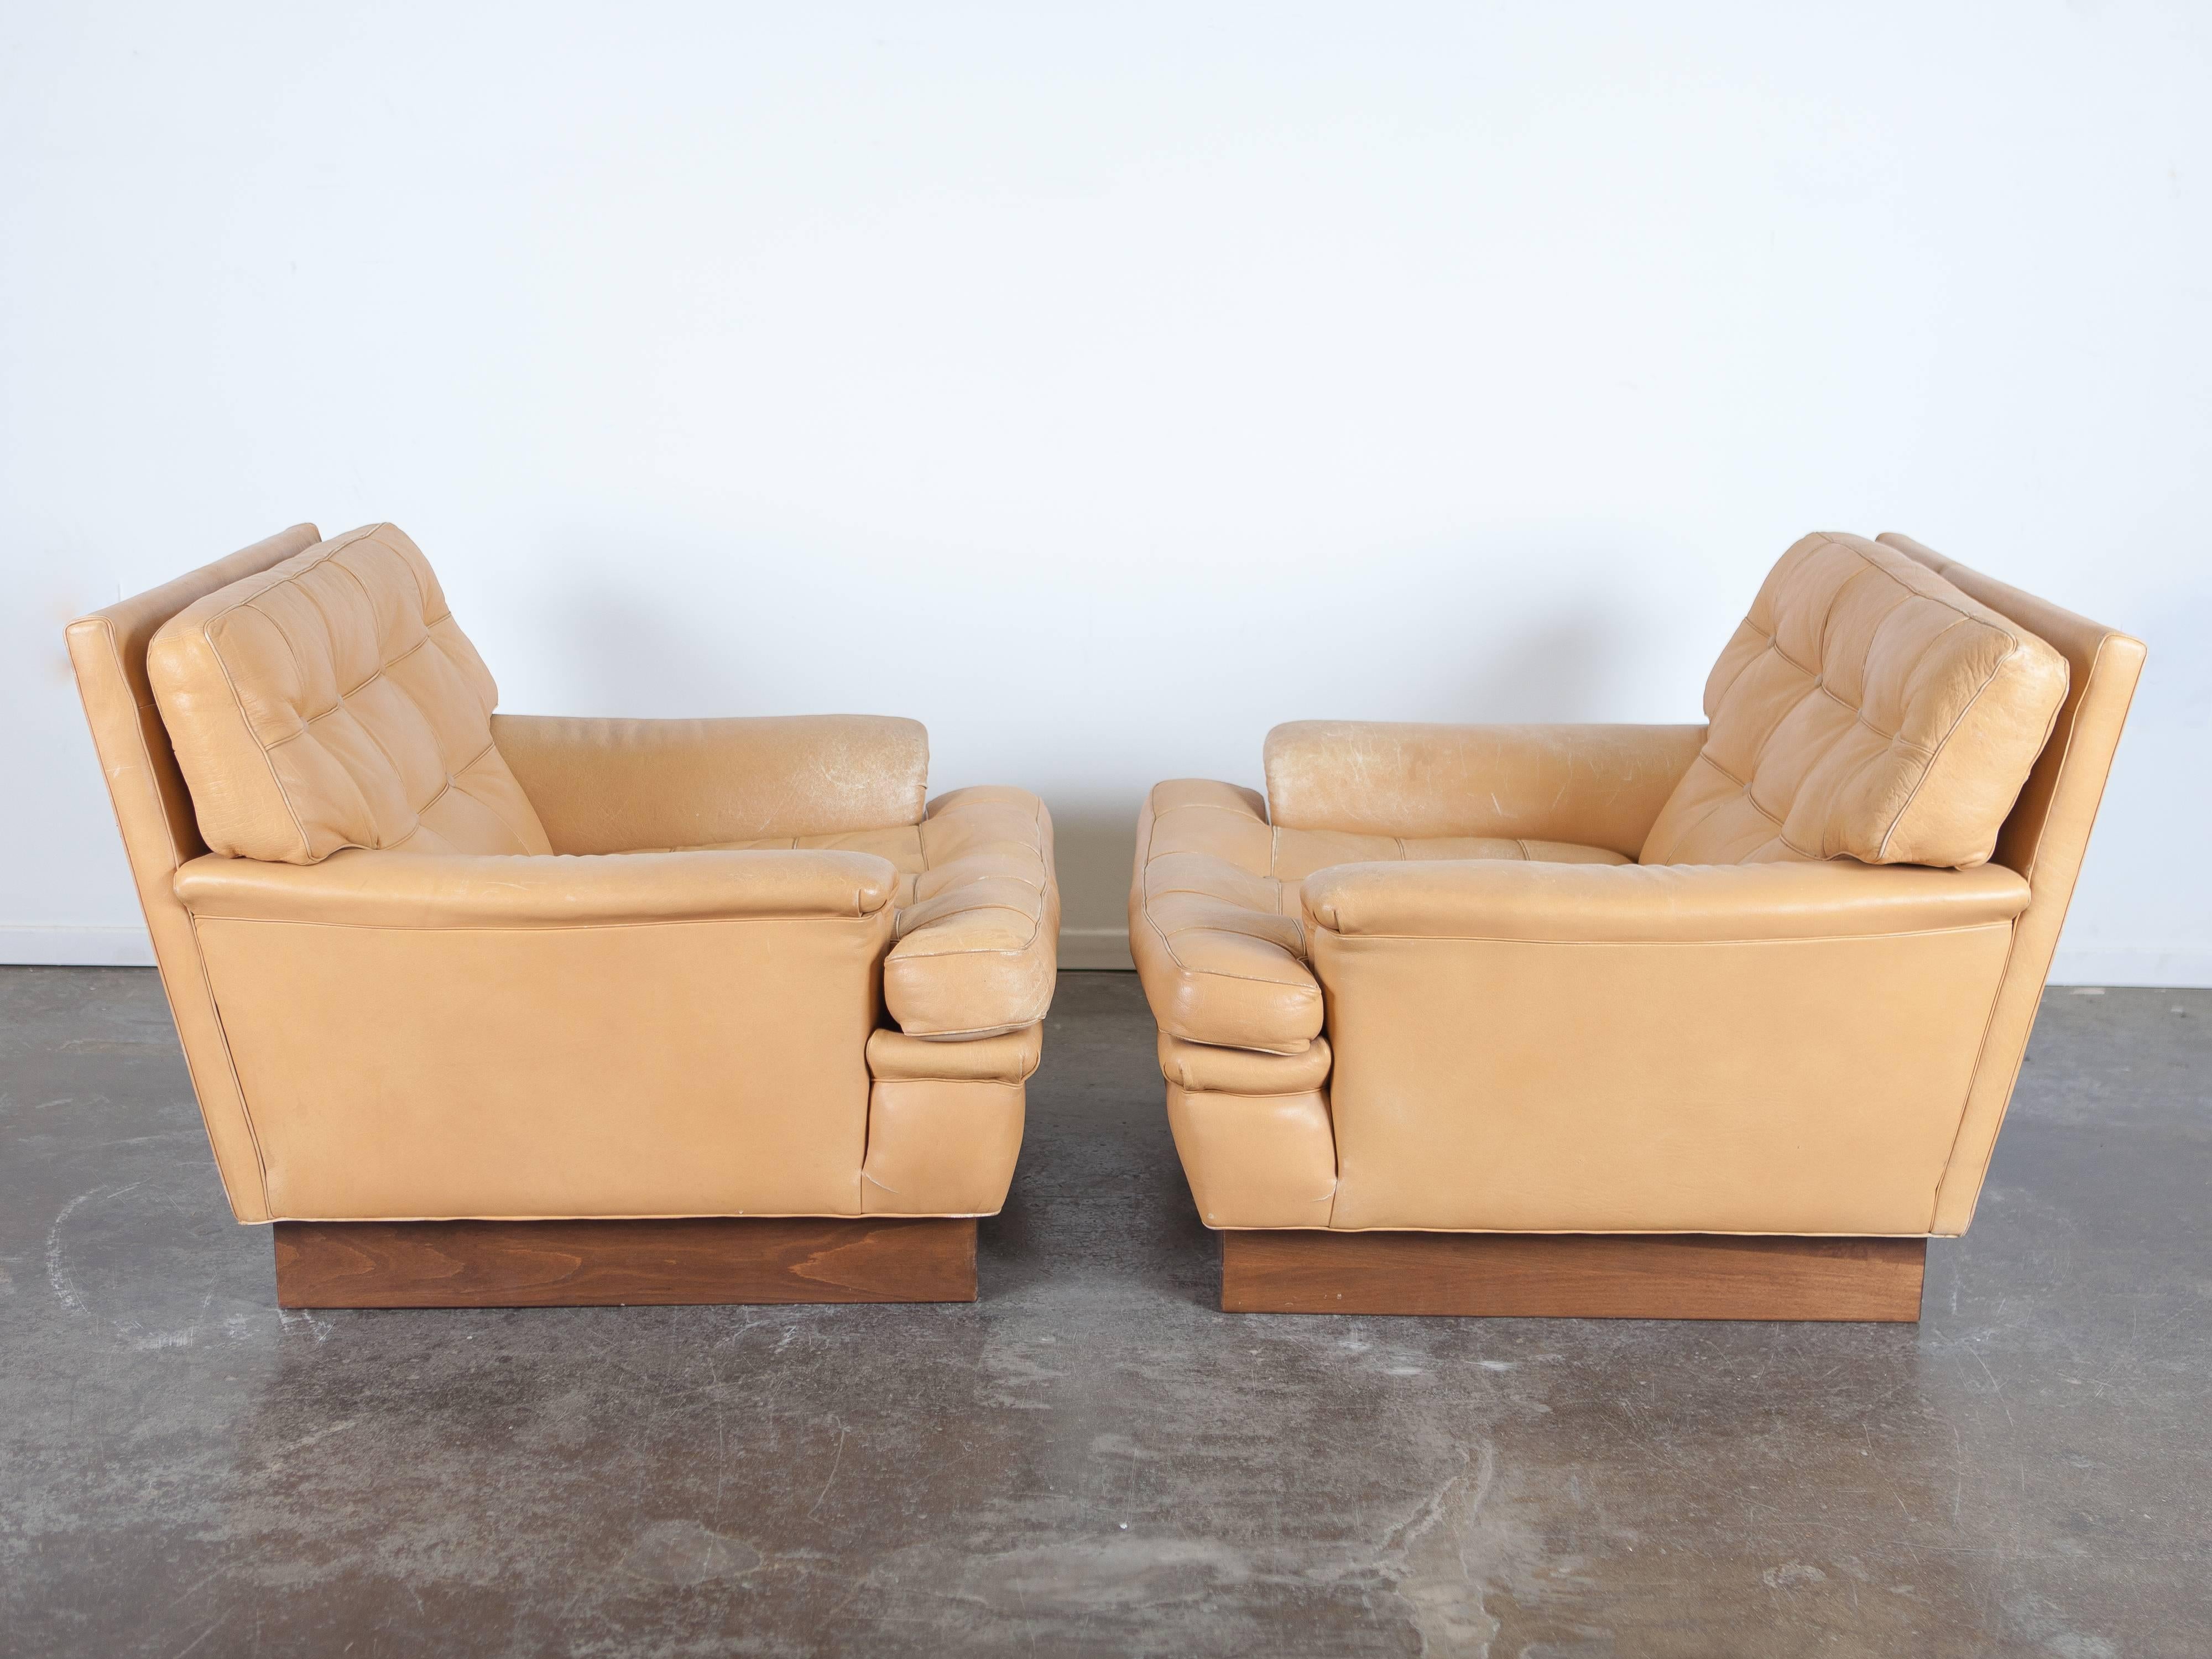 Pair of tan leather lounge chairs on plinth base, model Merkur, designed by Arne Norell and produced by Norell AB of Sweden.